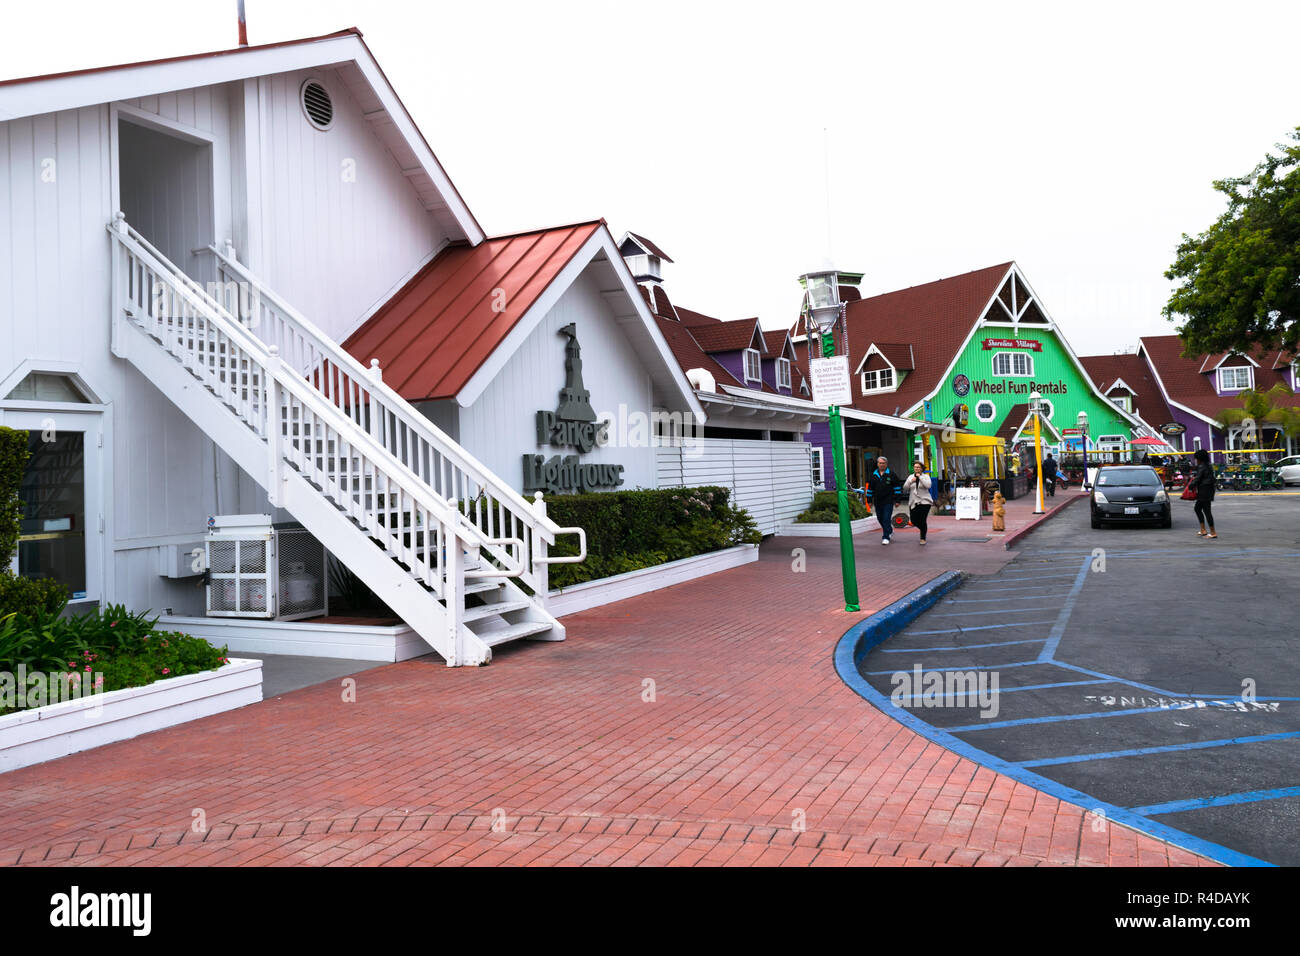 LONG BEACH, CA - FEBRUARY 20, 2017: Shoreline Village is a charming shopping village featuring colorful boardwalk shops and restaurants with Rainbow Harbor view. Stock Photo